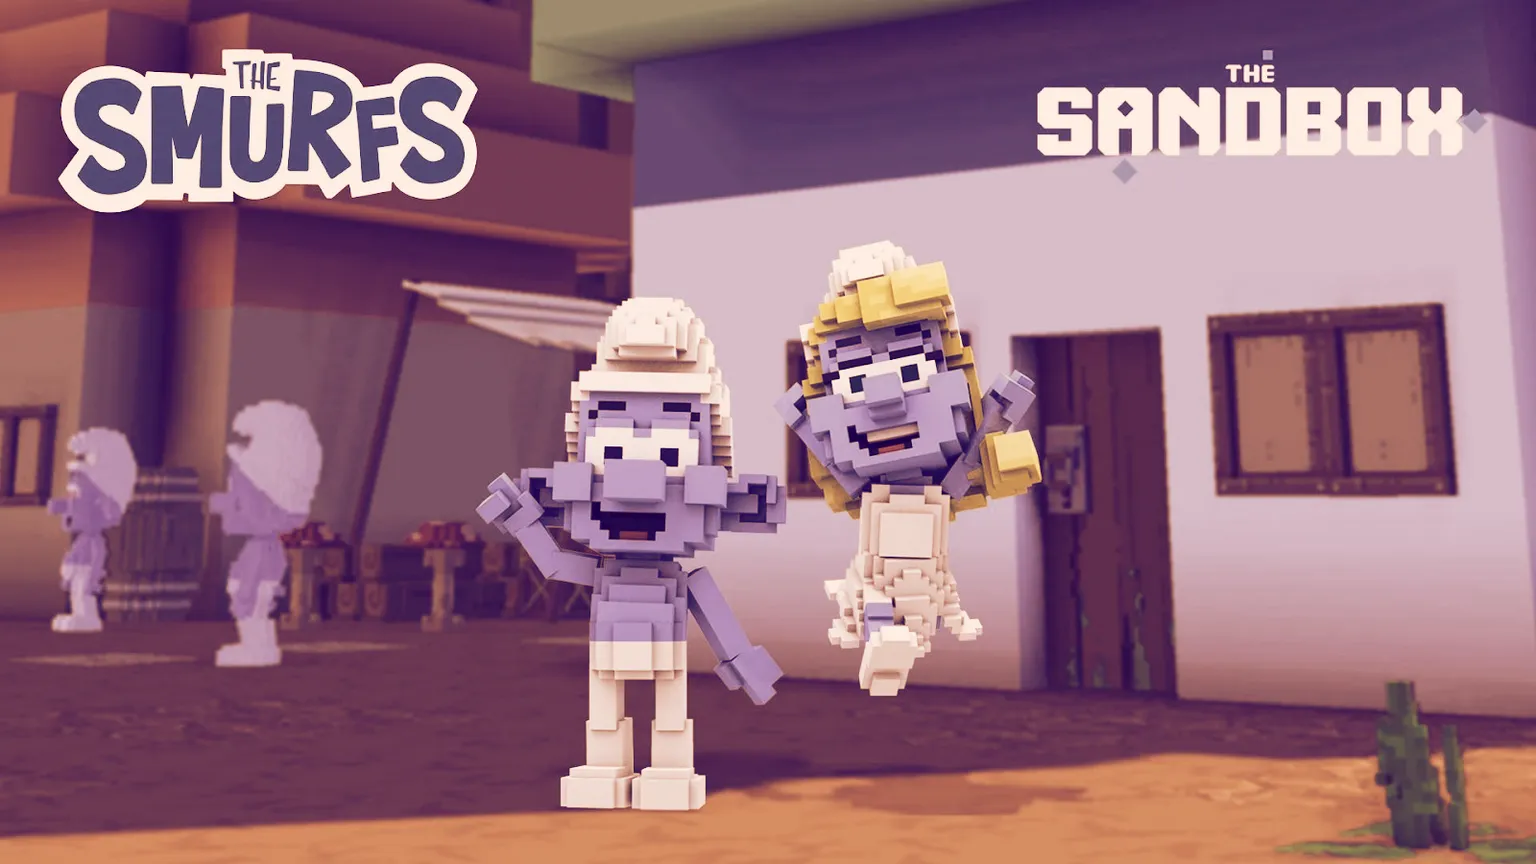 The Smurfs come to The Sandbox. Image credit: The Smurfs